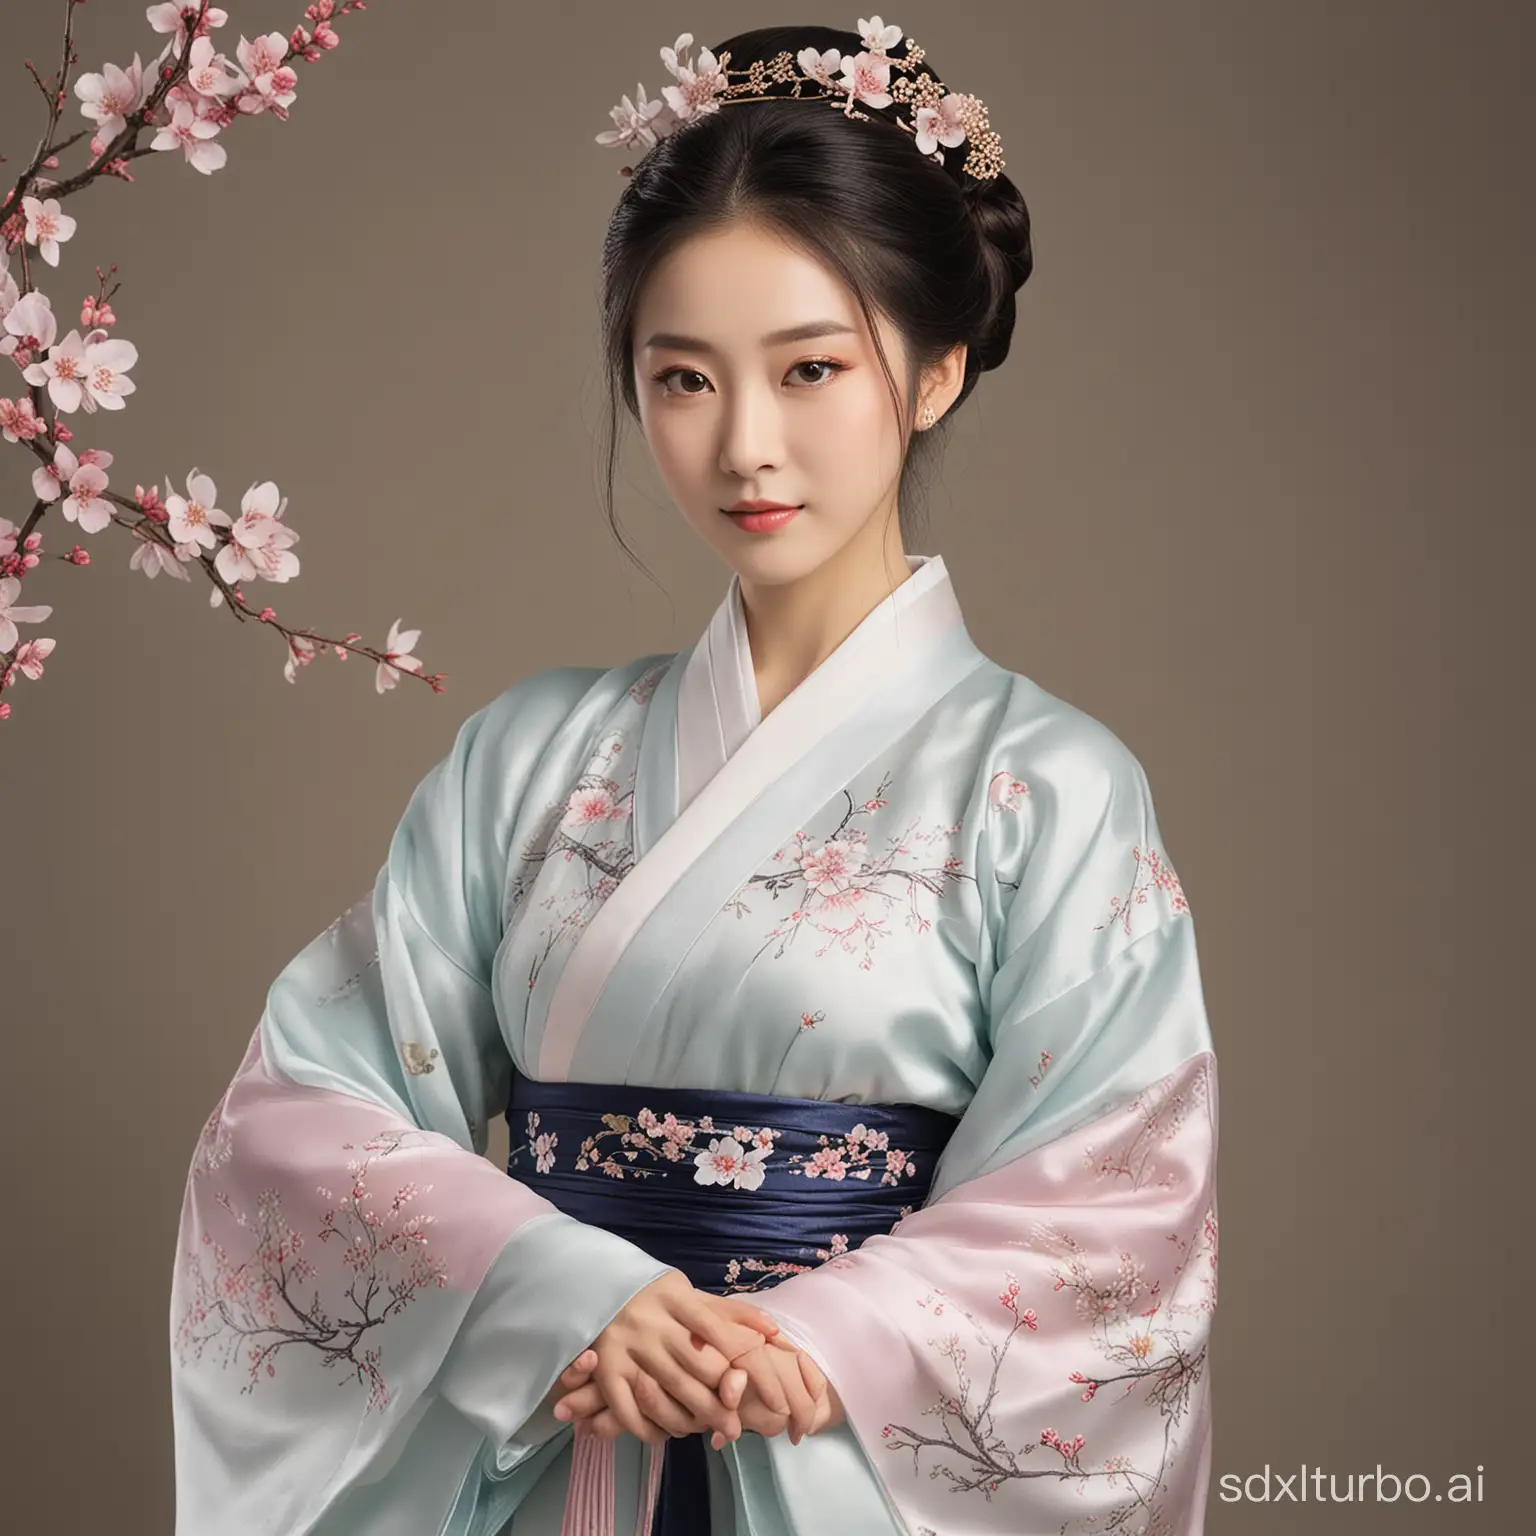 An elegant and dignified oriental beauty dressed in Hanfu.